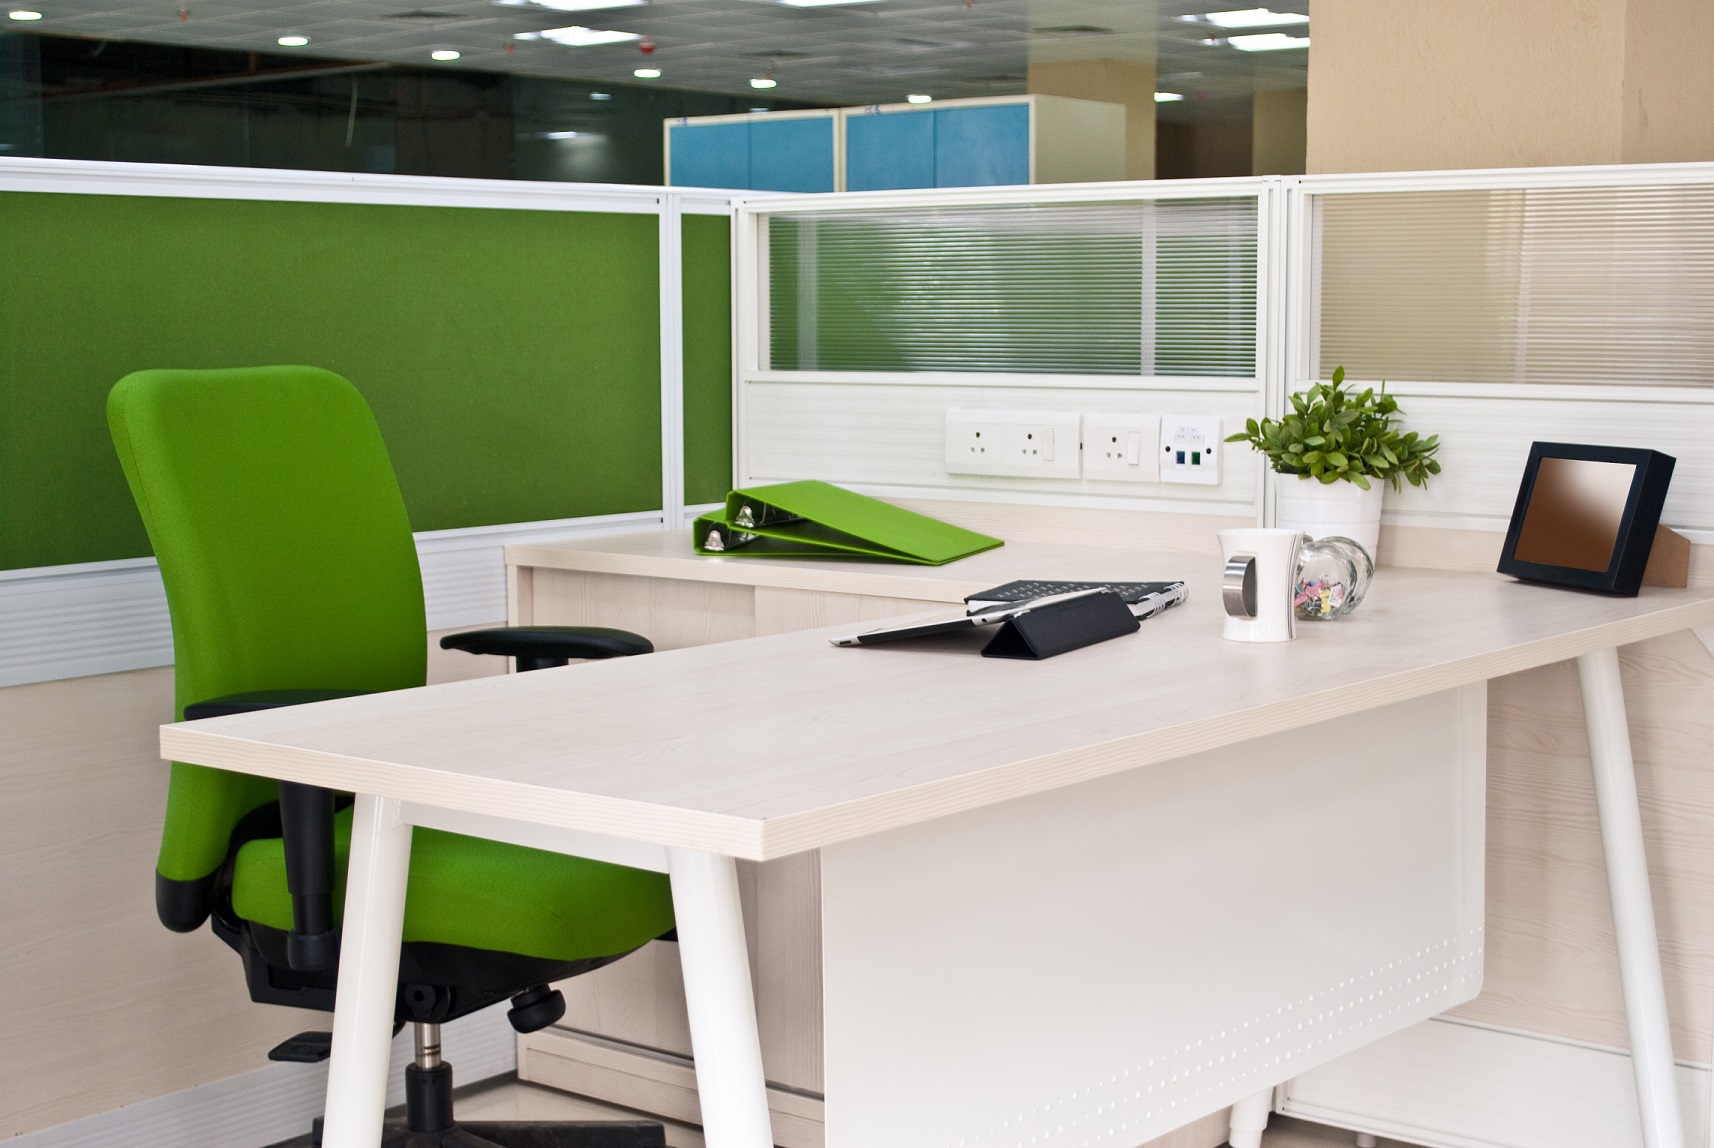 Are Cubicles Right for Your Office?